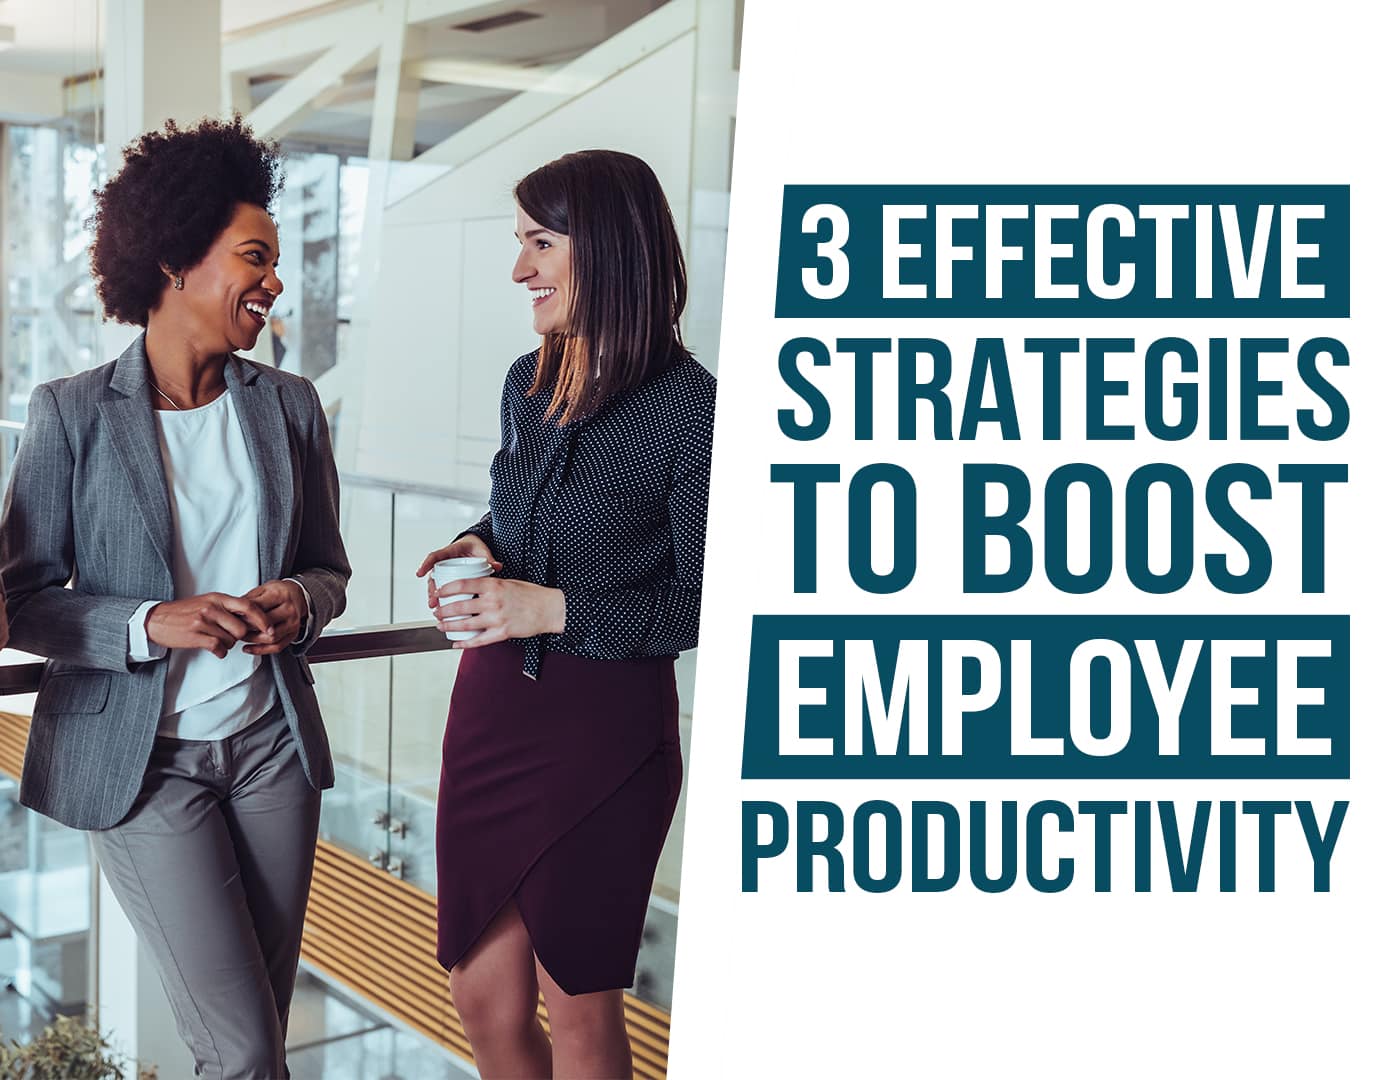 3 effective strategies to boost employee productivity